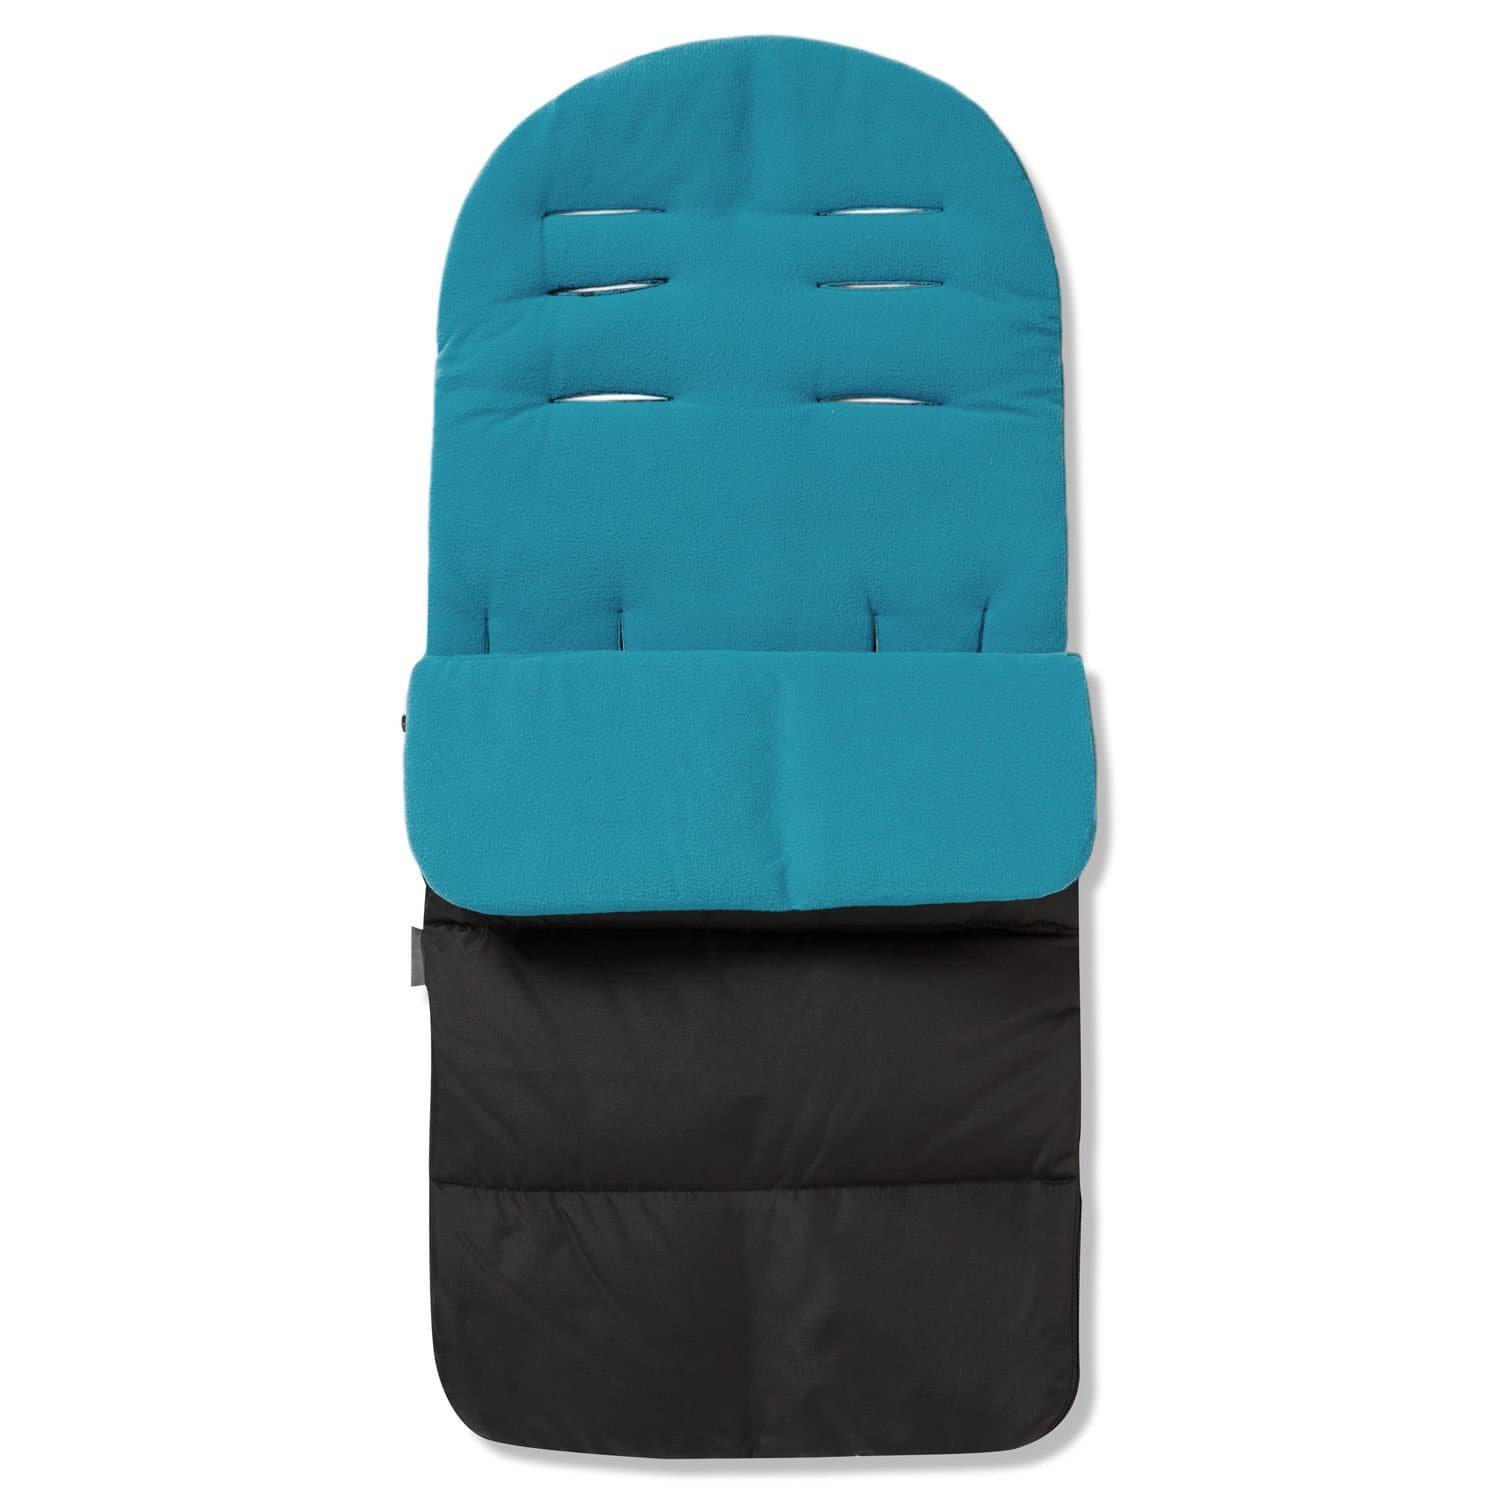 Premium Footmuff / Cosy Toes Compatible with My Babiie - Ocean Blue / Fits All Models | For Your Little One